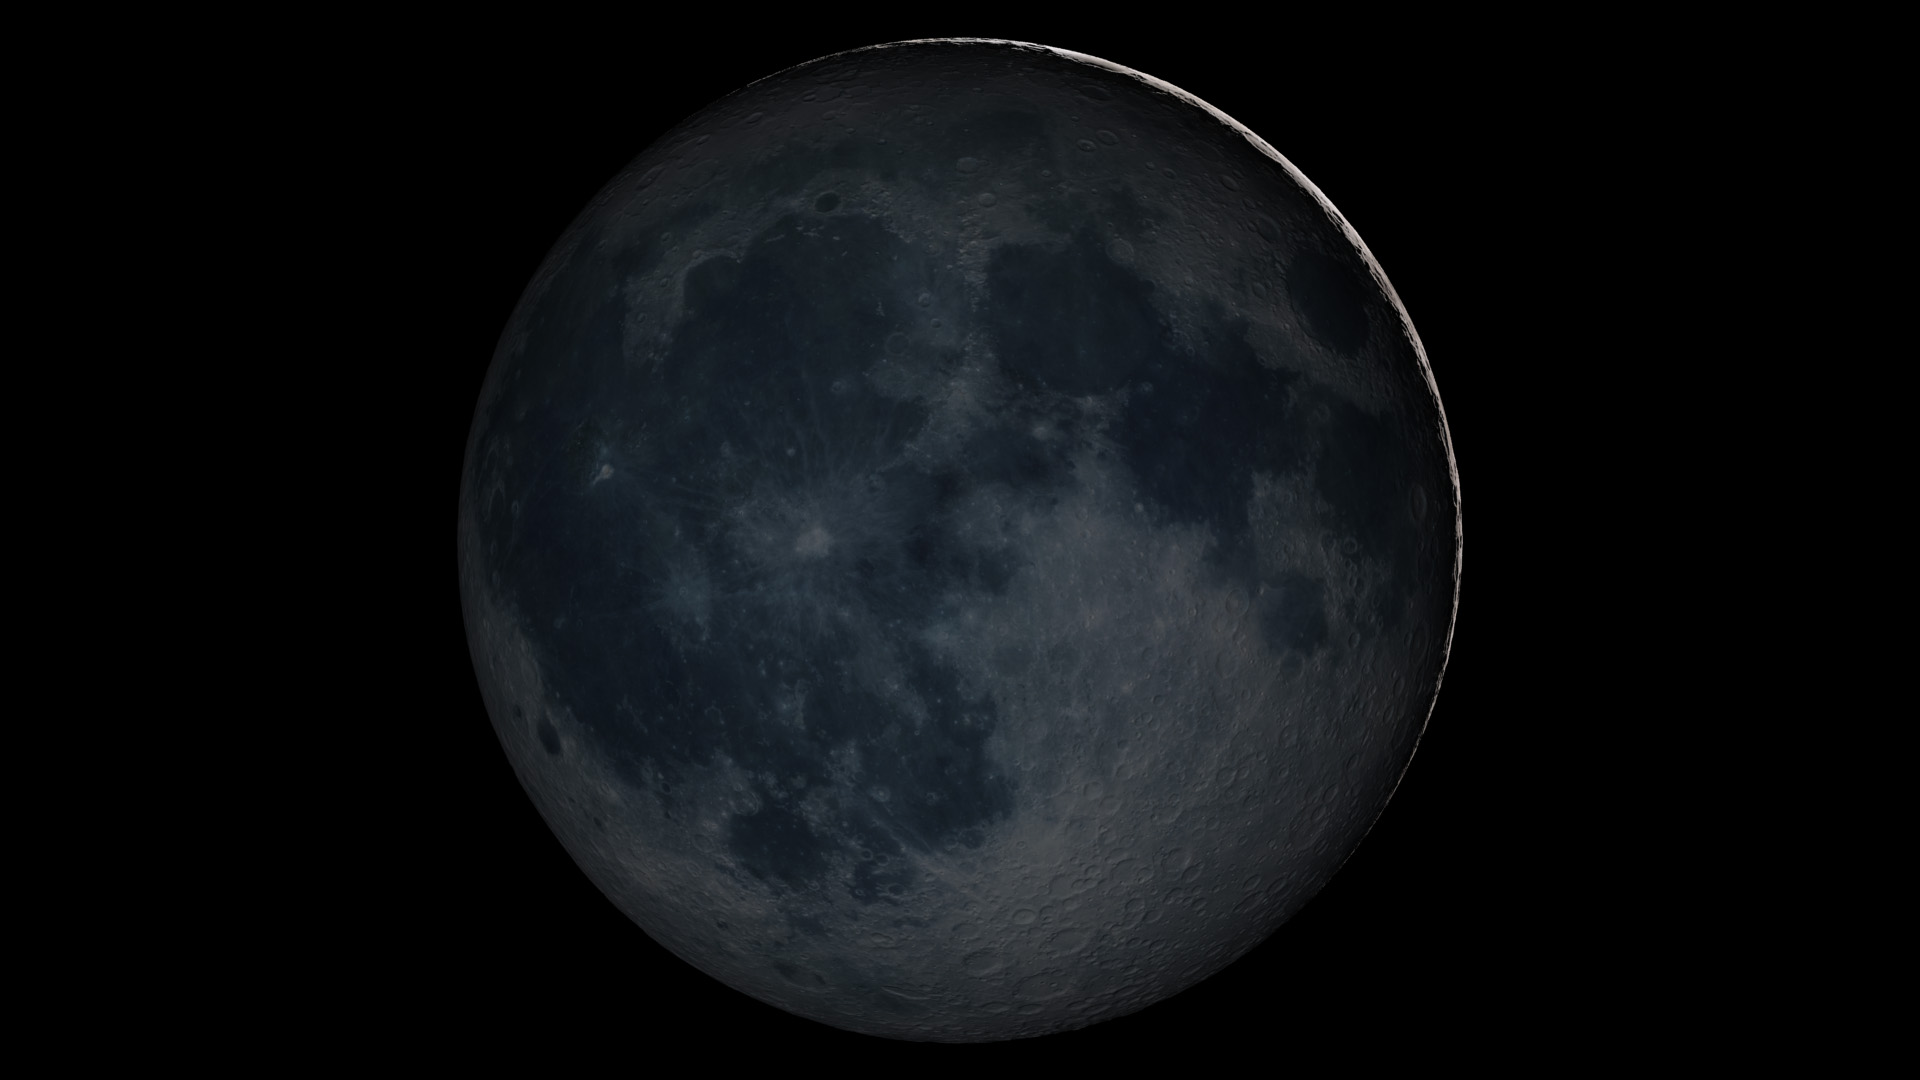 July new moon 2020: Look Saturn at its brightest in the moonless evening sky